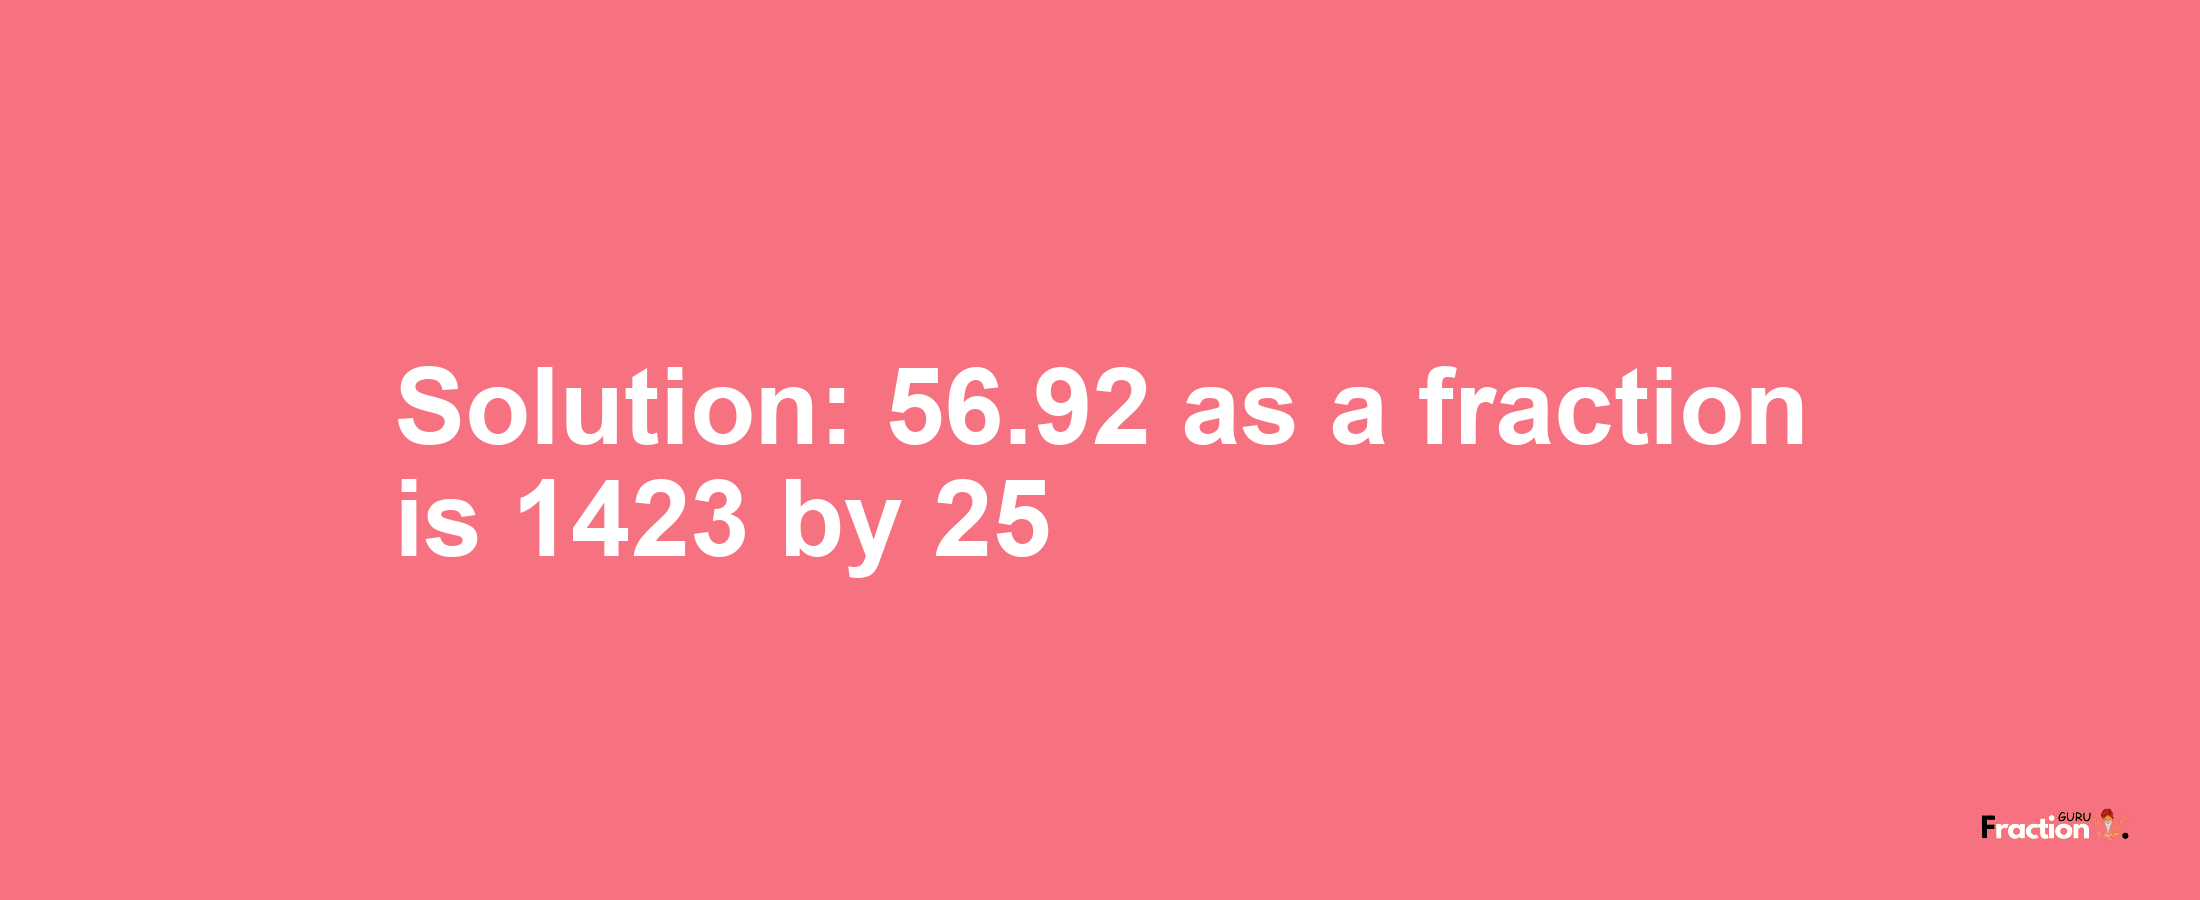 Solution:56.92 as a fraction is 1423/25